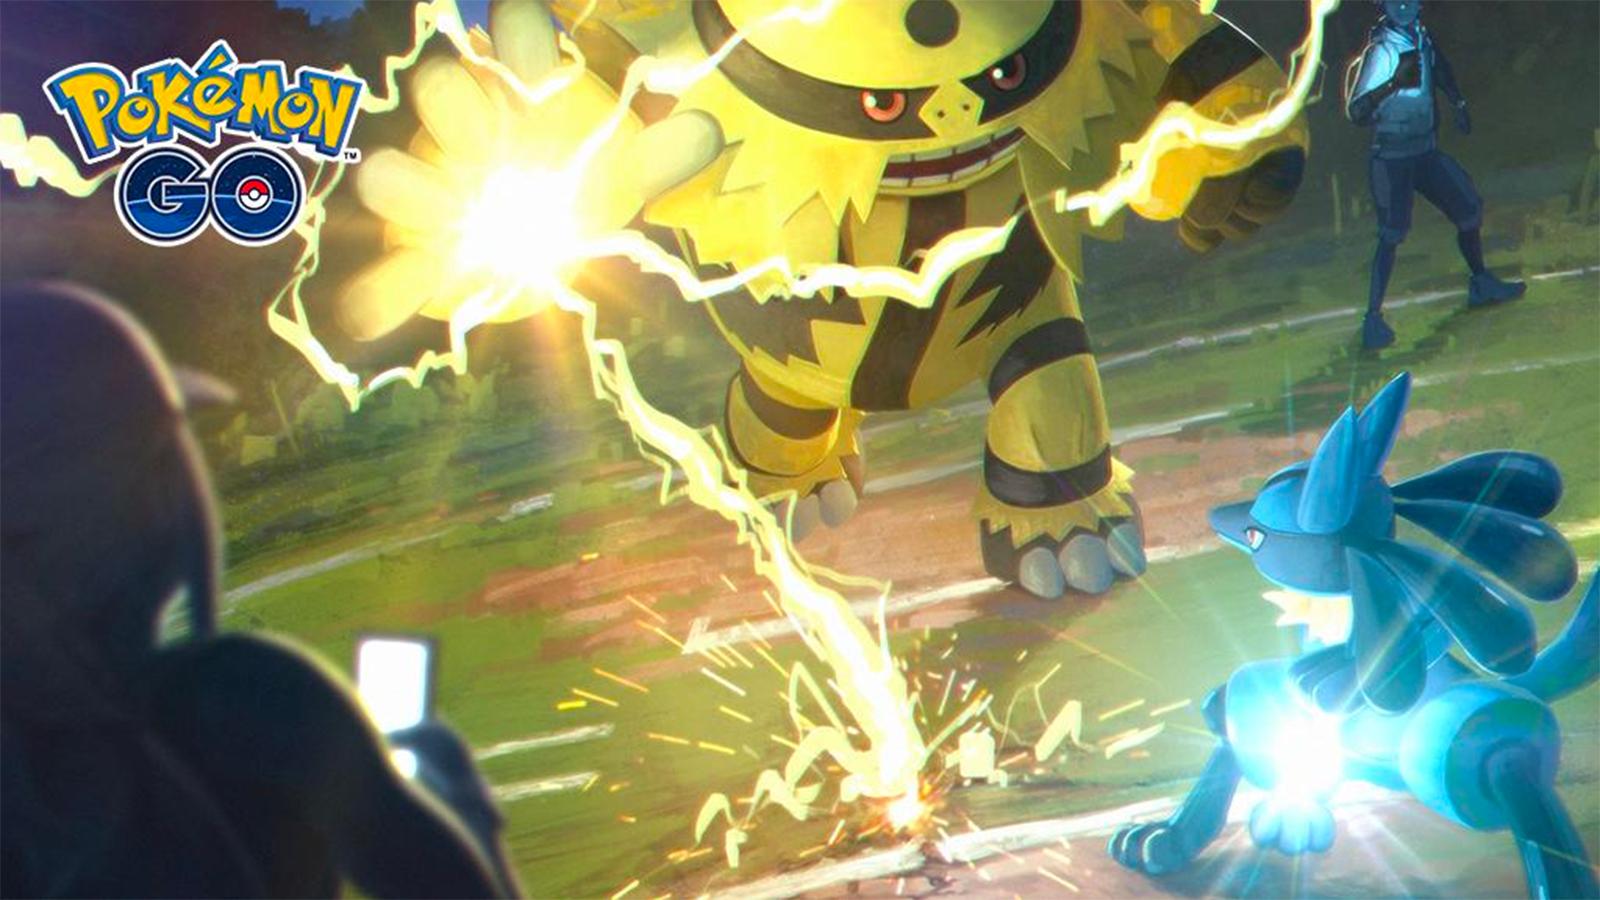 How to Use Super Effective Charged Attacks in Pokemon Go - Pokemon GO Guide  - IGN